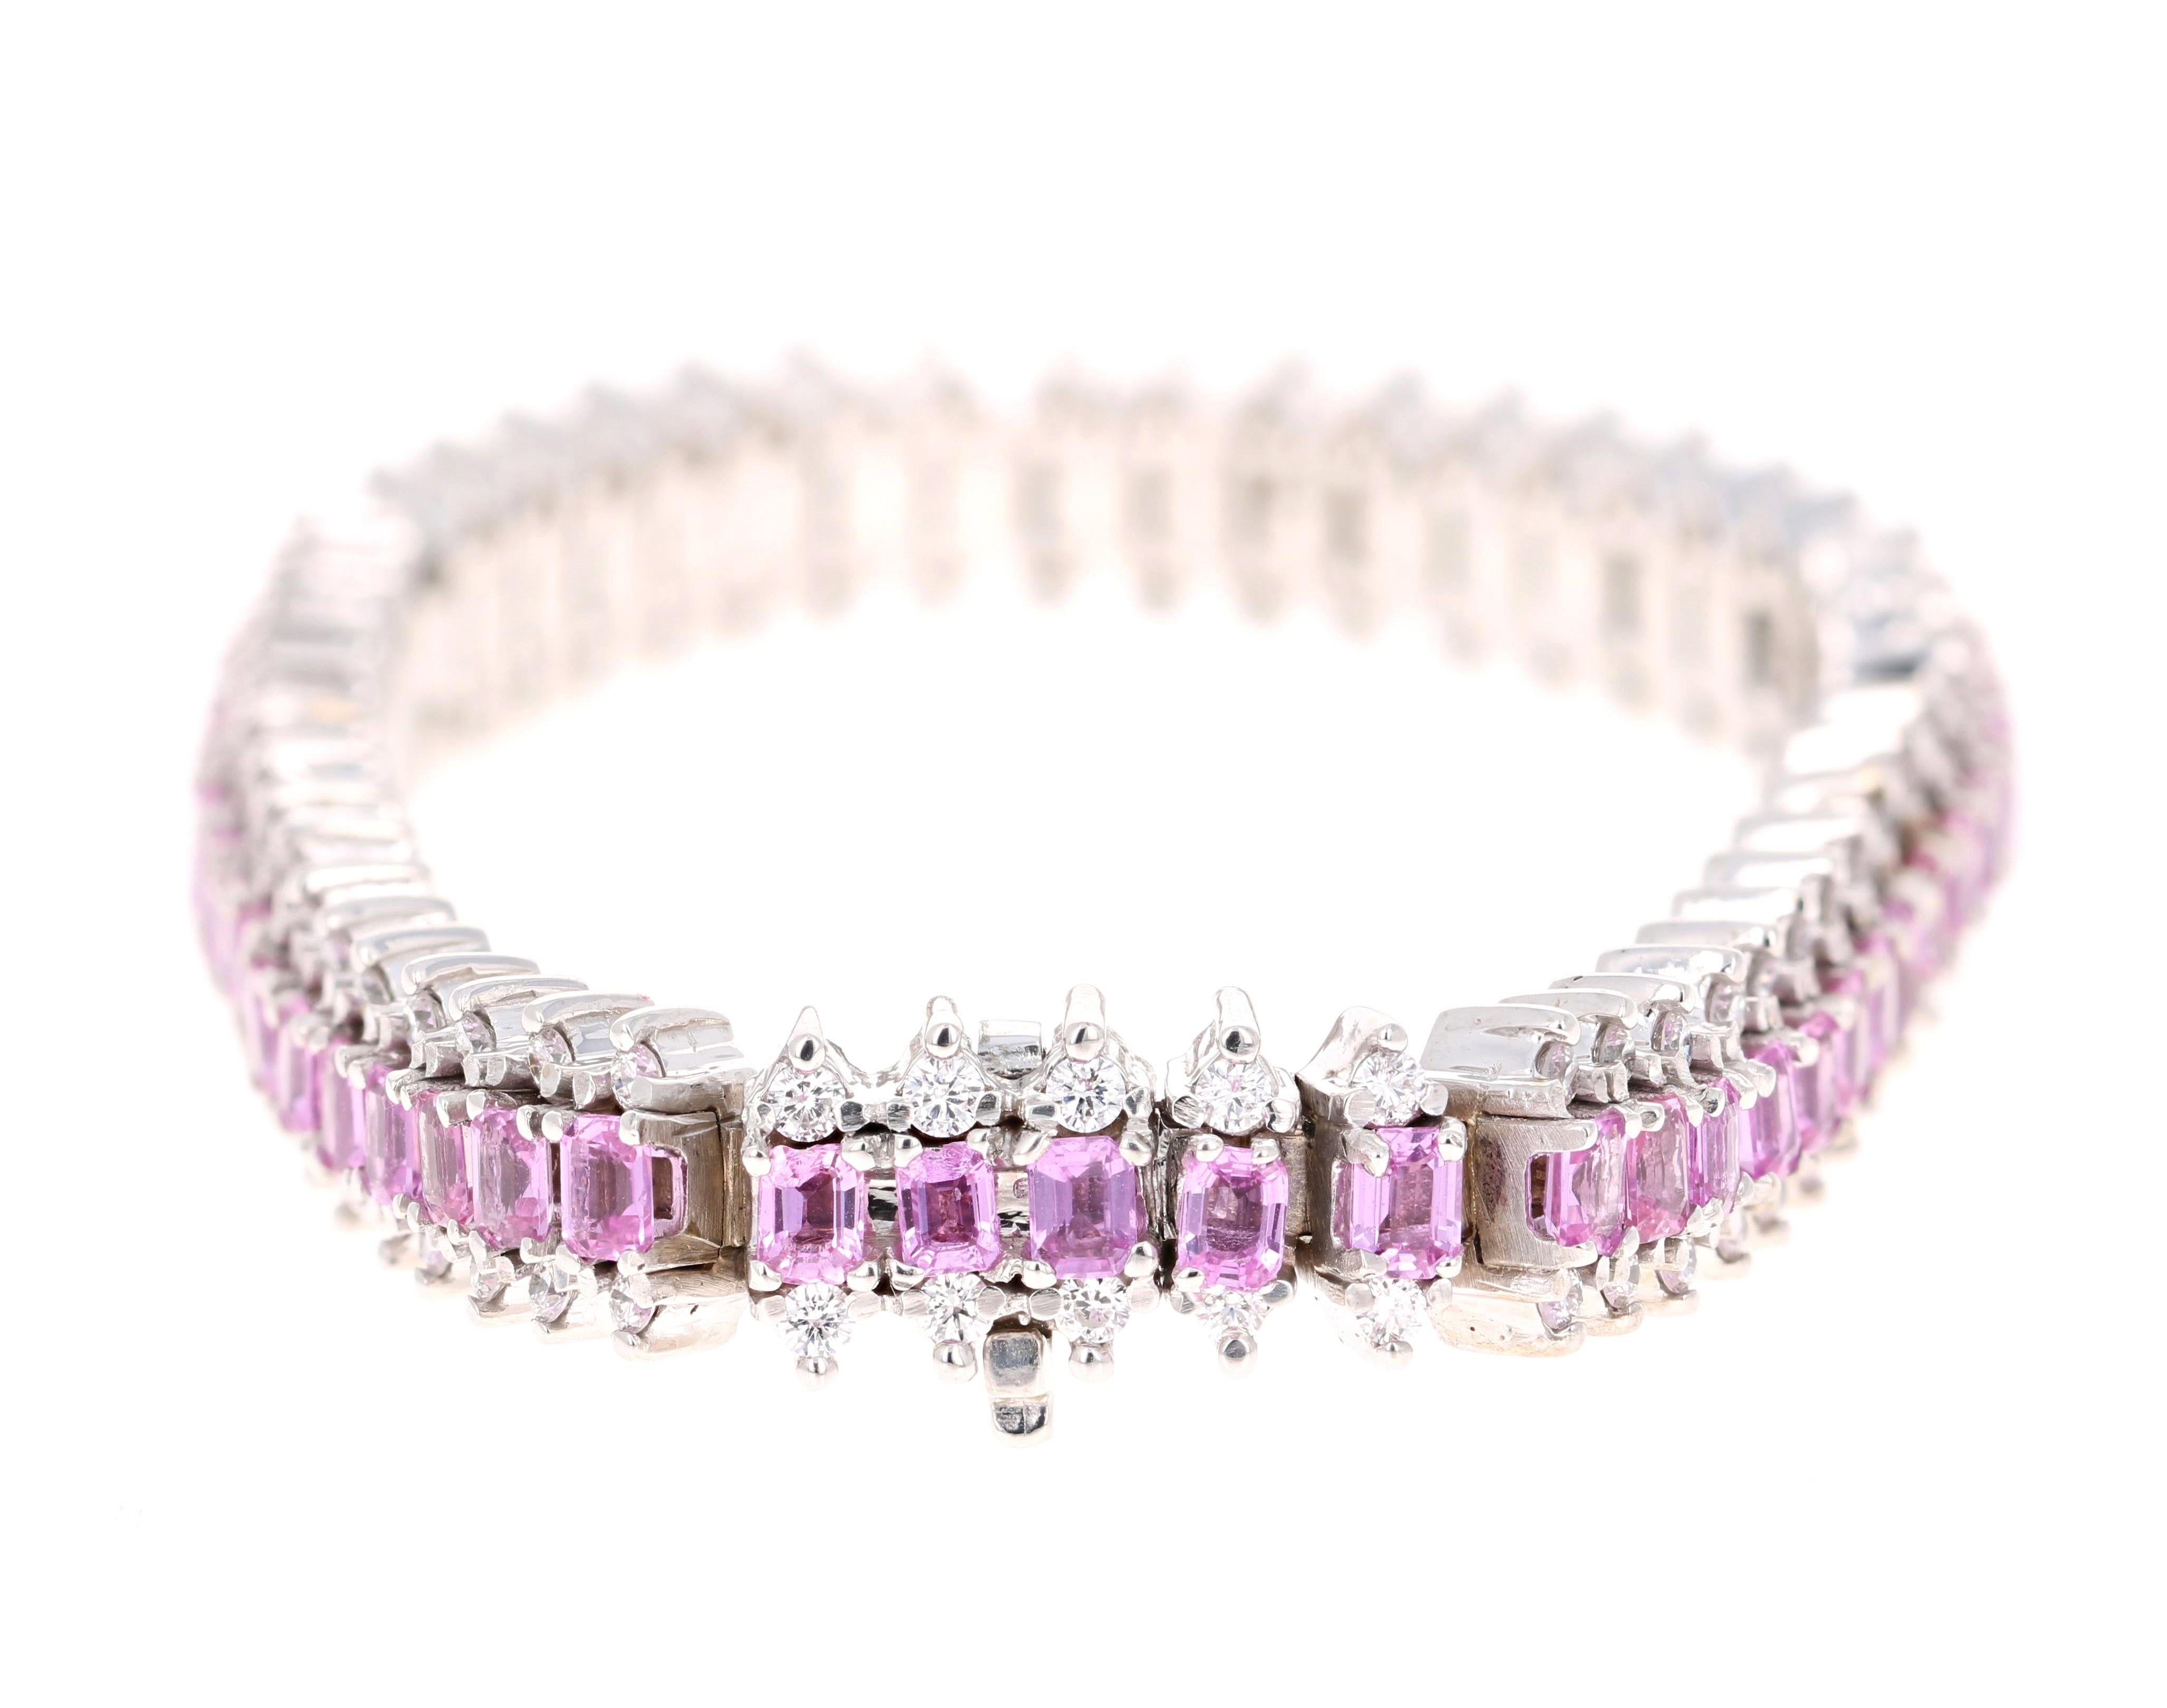  Pink Sapphire & Diamond Bracelet

This Bracelet has 52 Natural Emerald Cut Pink Sapphires that weigh 12.00 Carats. It also has 104 Round Cut Diamonds that weigh 2.60 Carats. The total carat weight of the bracelet is 14.60 Carats. (Clarity: VS,